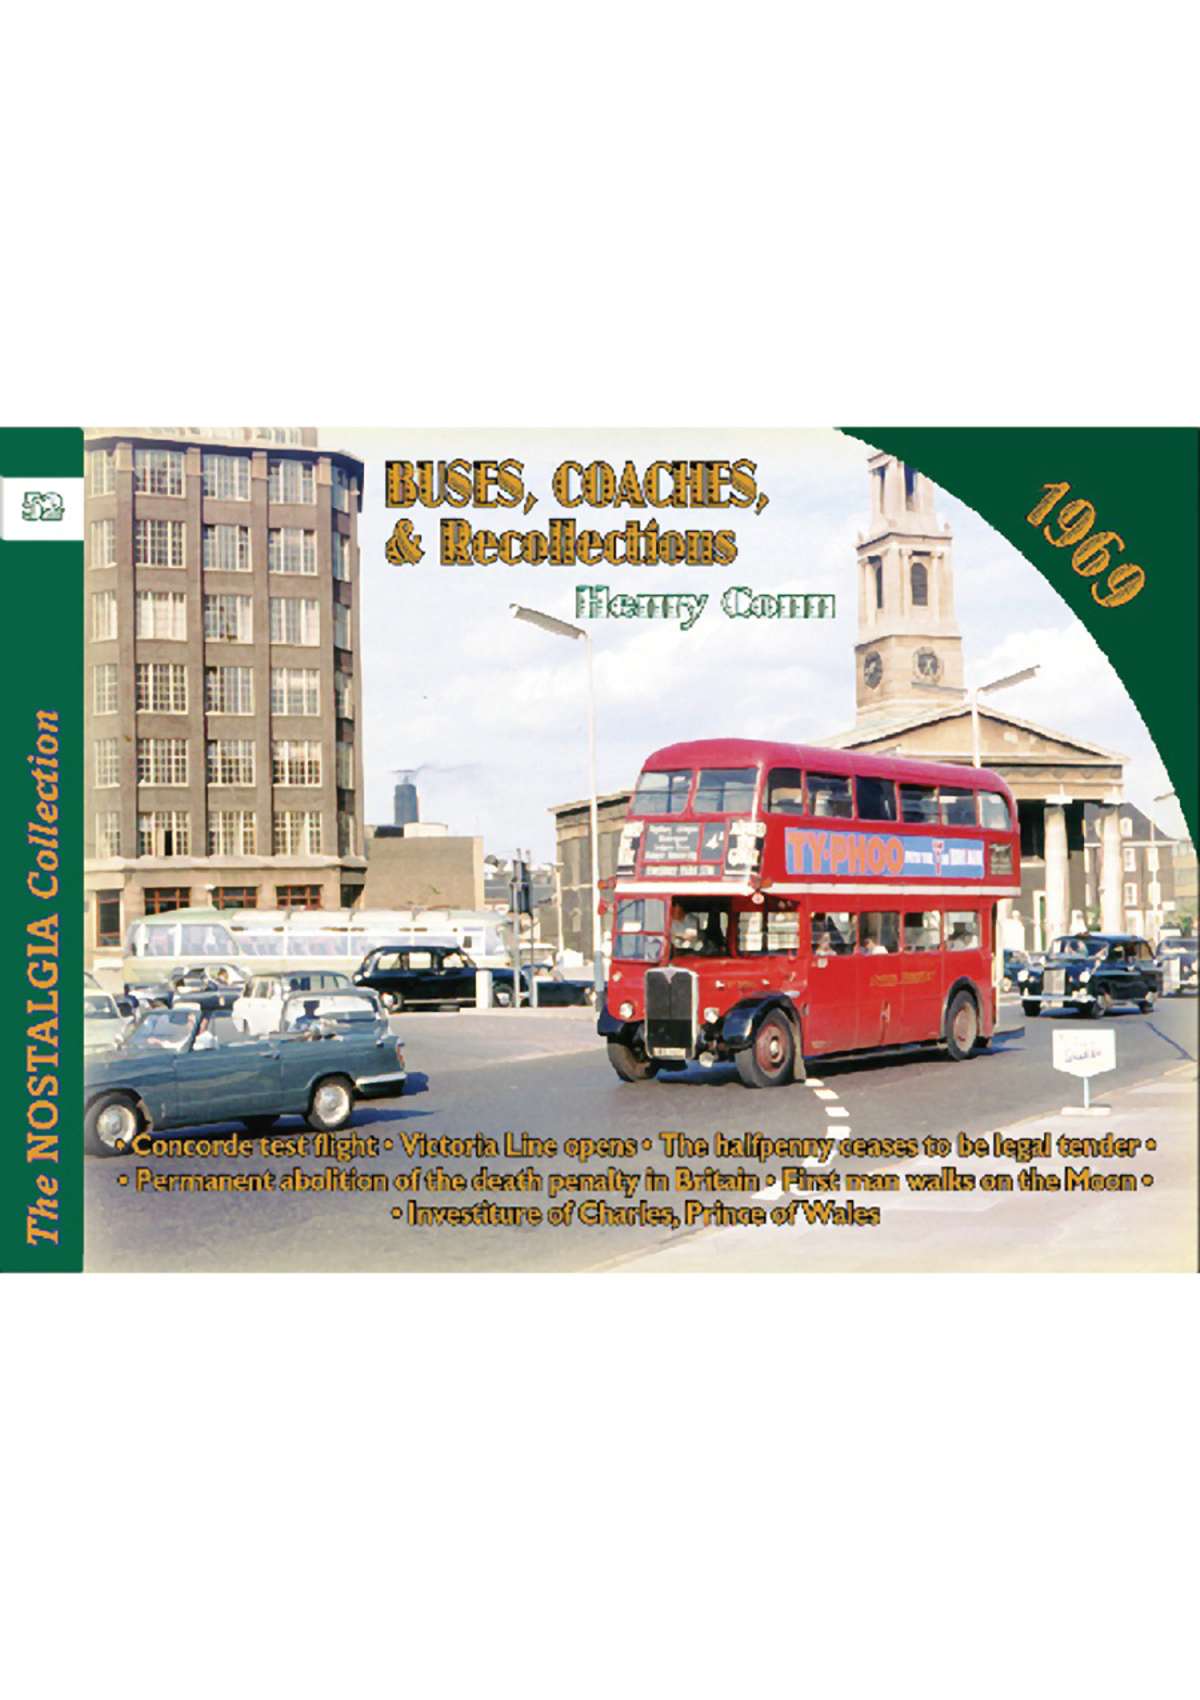 4570 Vol 52 Buses, Coaches and Recollections 1969